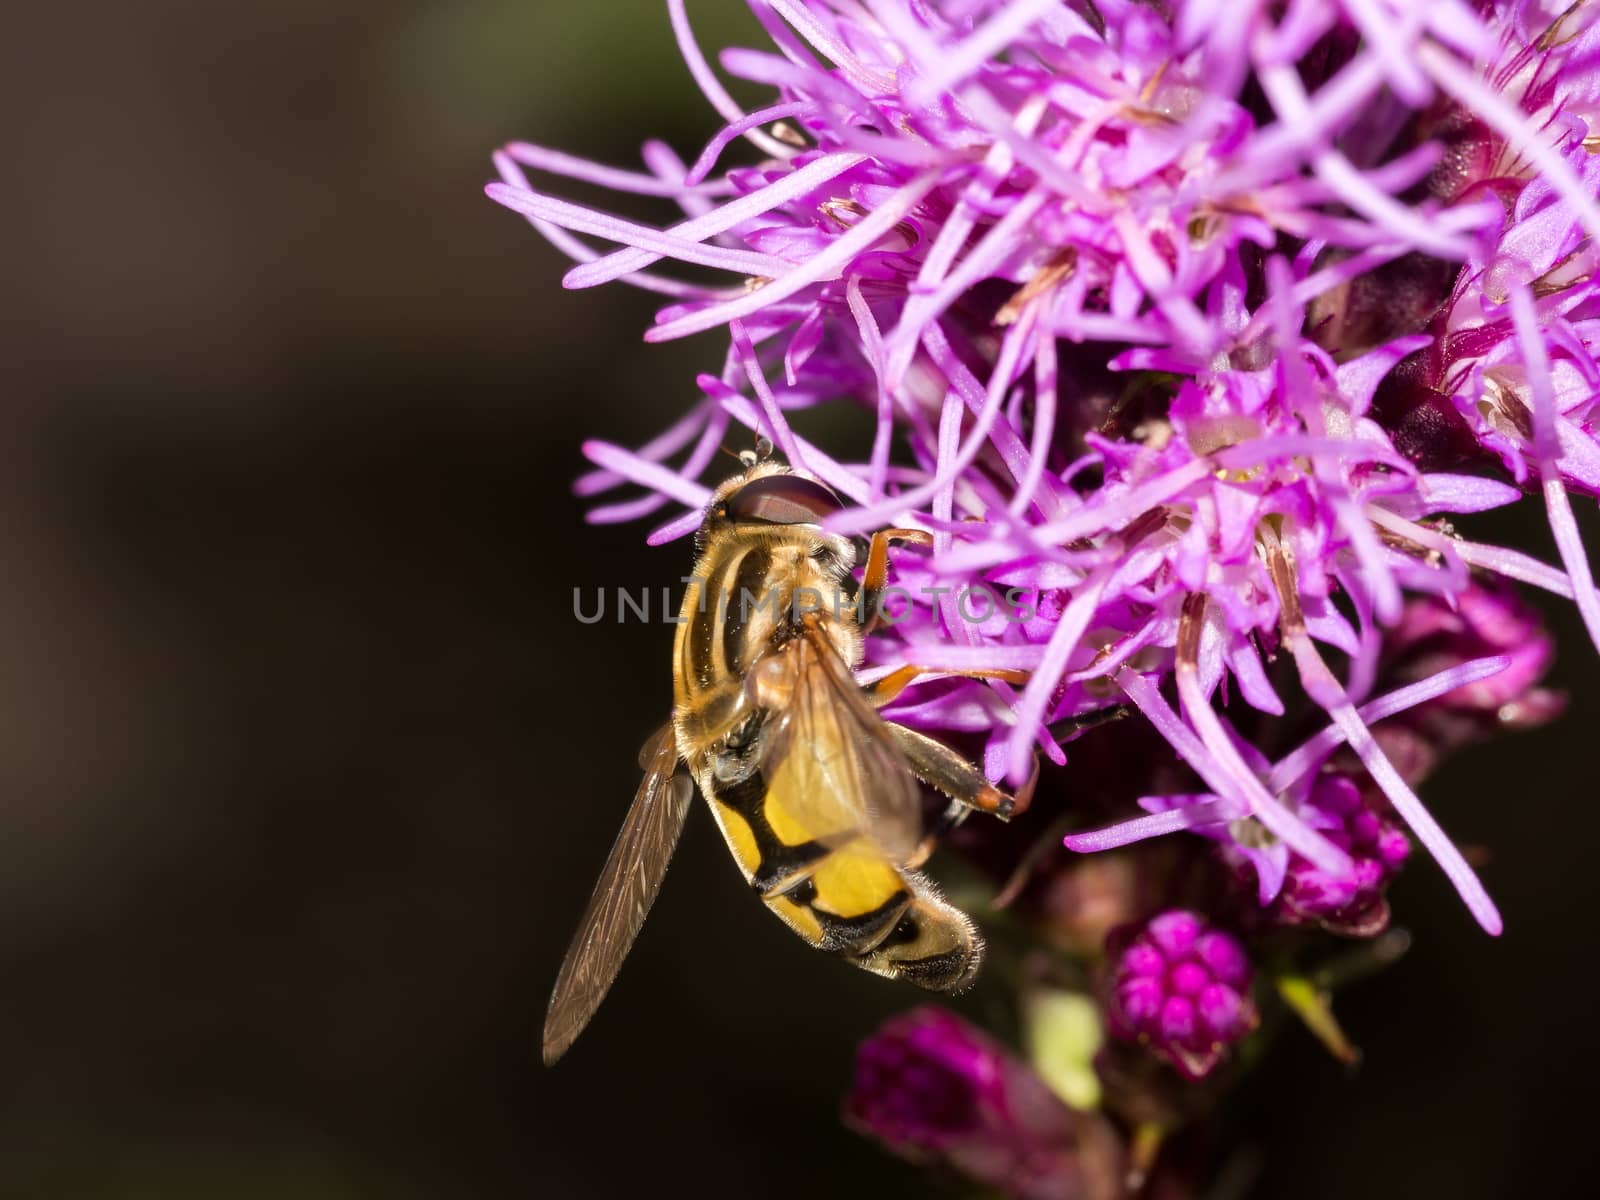 These flowers are always swarming with bee's and wasps towards the end of the day when the sun gets low. This was a very close up shot taken with my macro lens which really isolates the subject nicely.